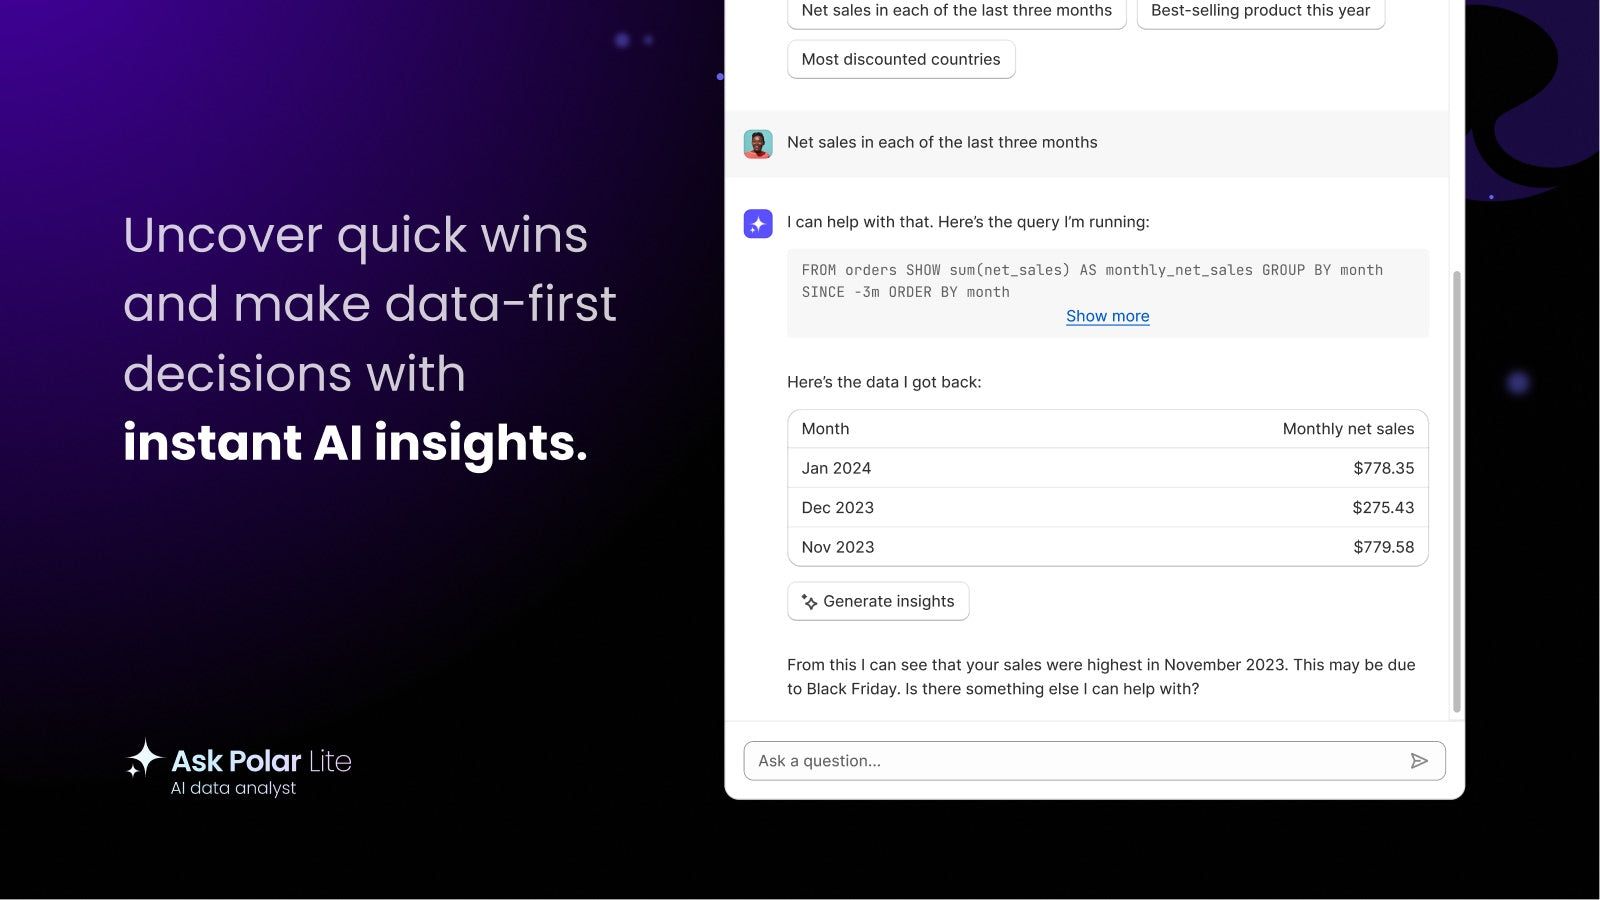 Uncover quick wins and make data-first decisions